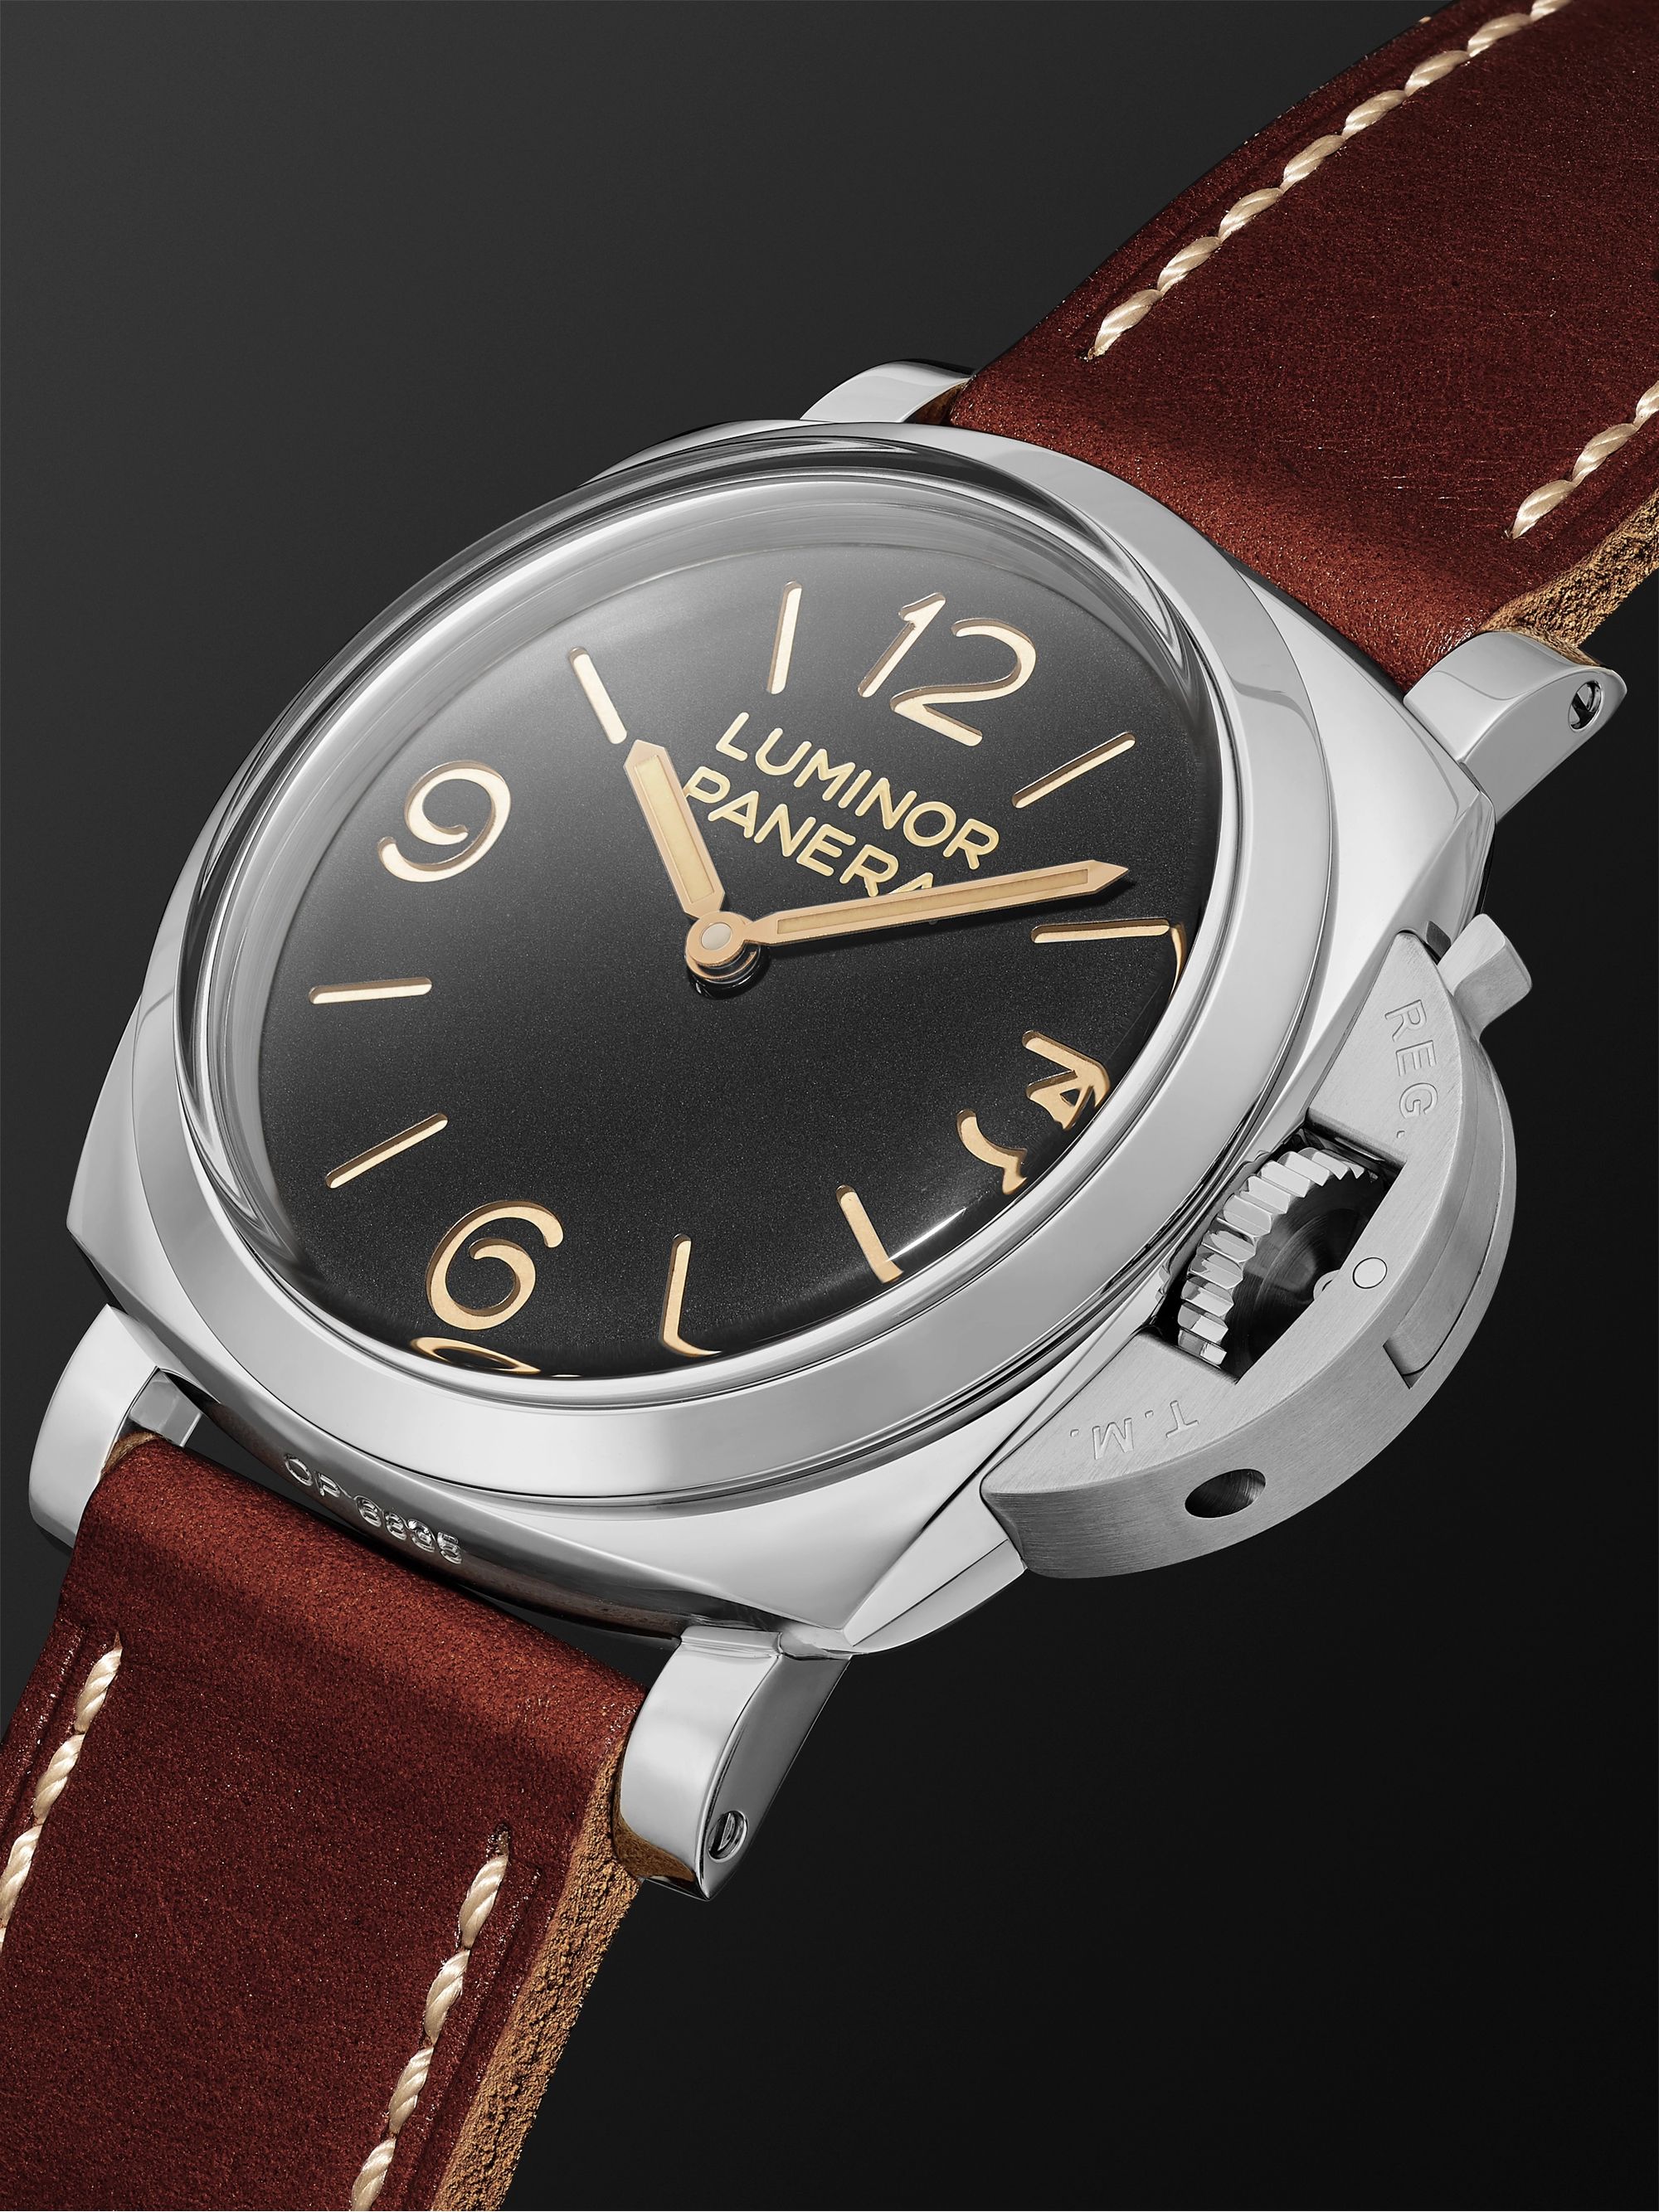 PANERAI Luminor 1950 Hand-Wound 47mm Stainless Steel and Leather Watch, Ref. No. PAM00372